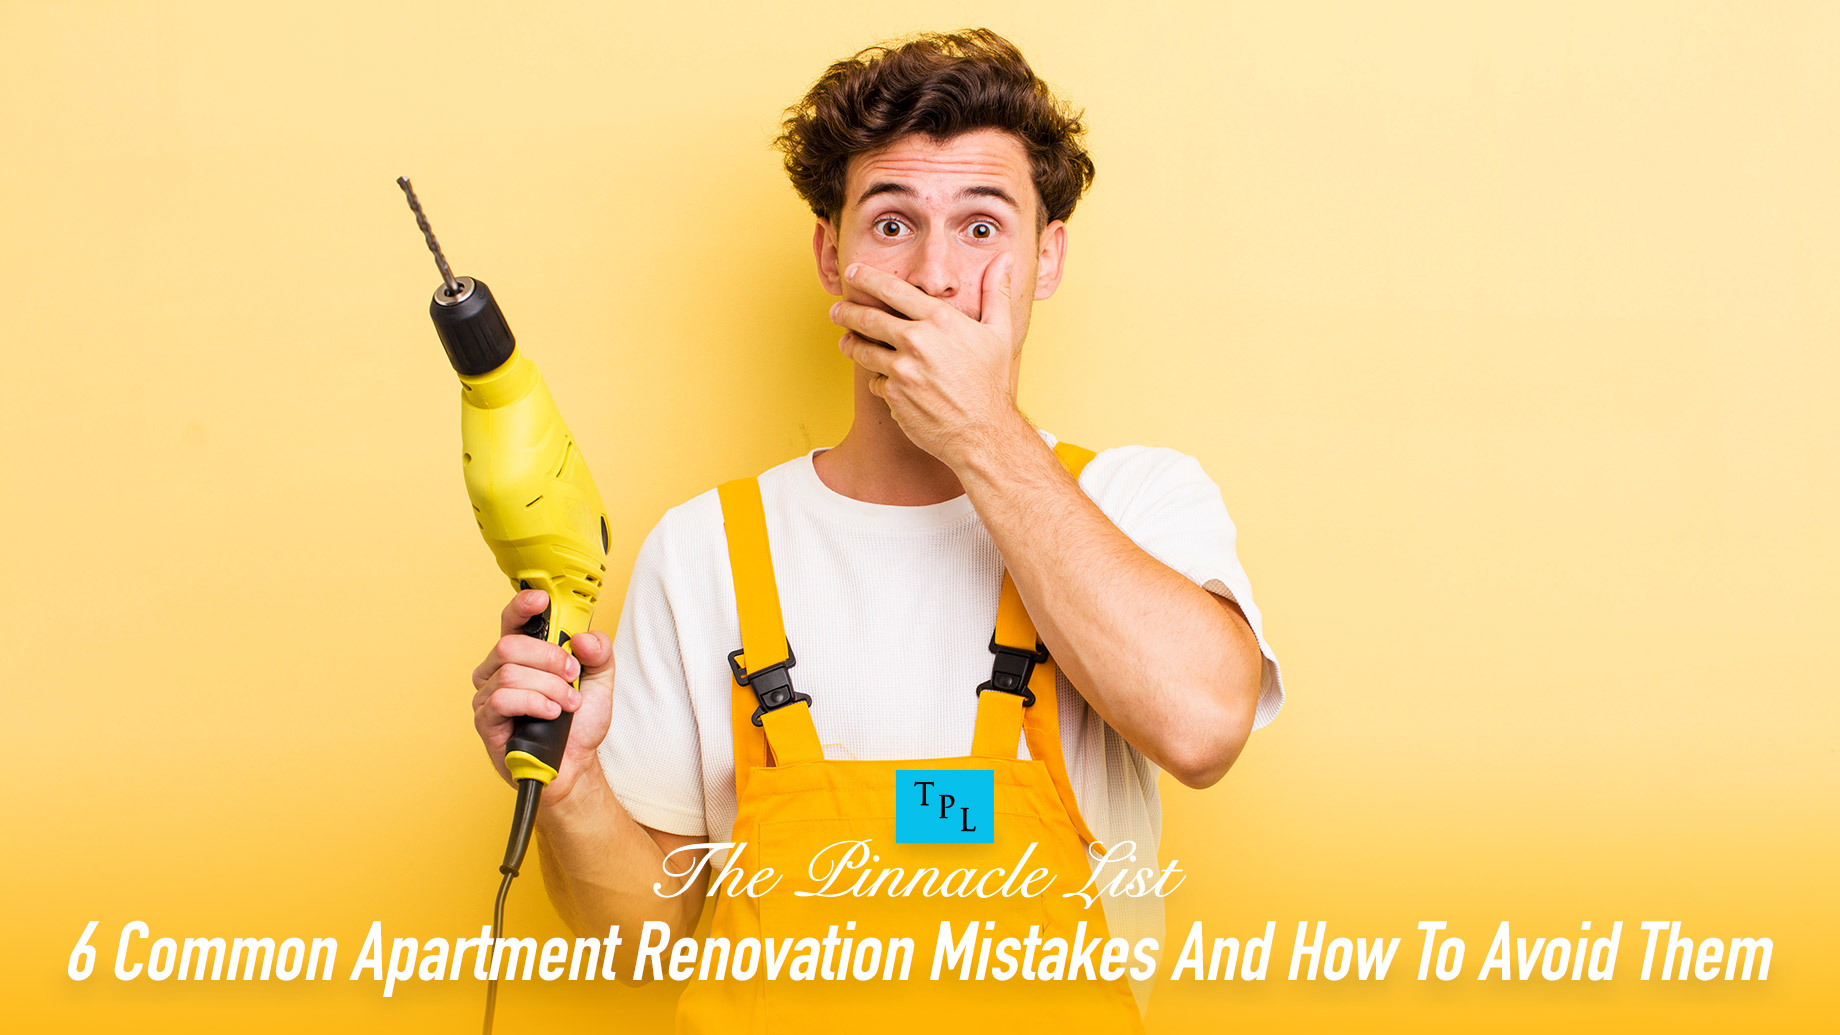 6 Common Apartment Renovation Mistakes And How To Avoid Them